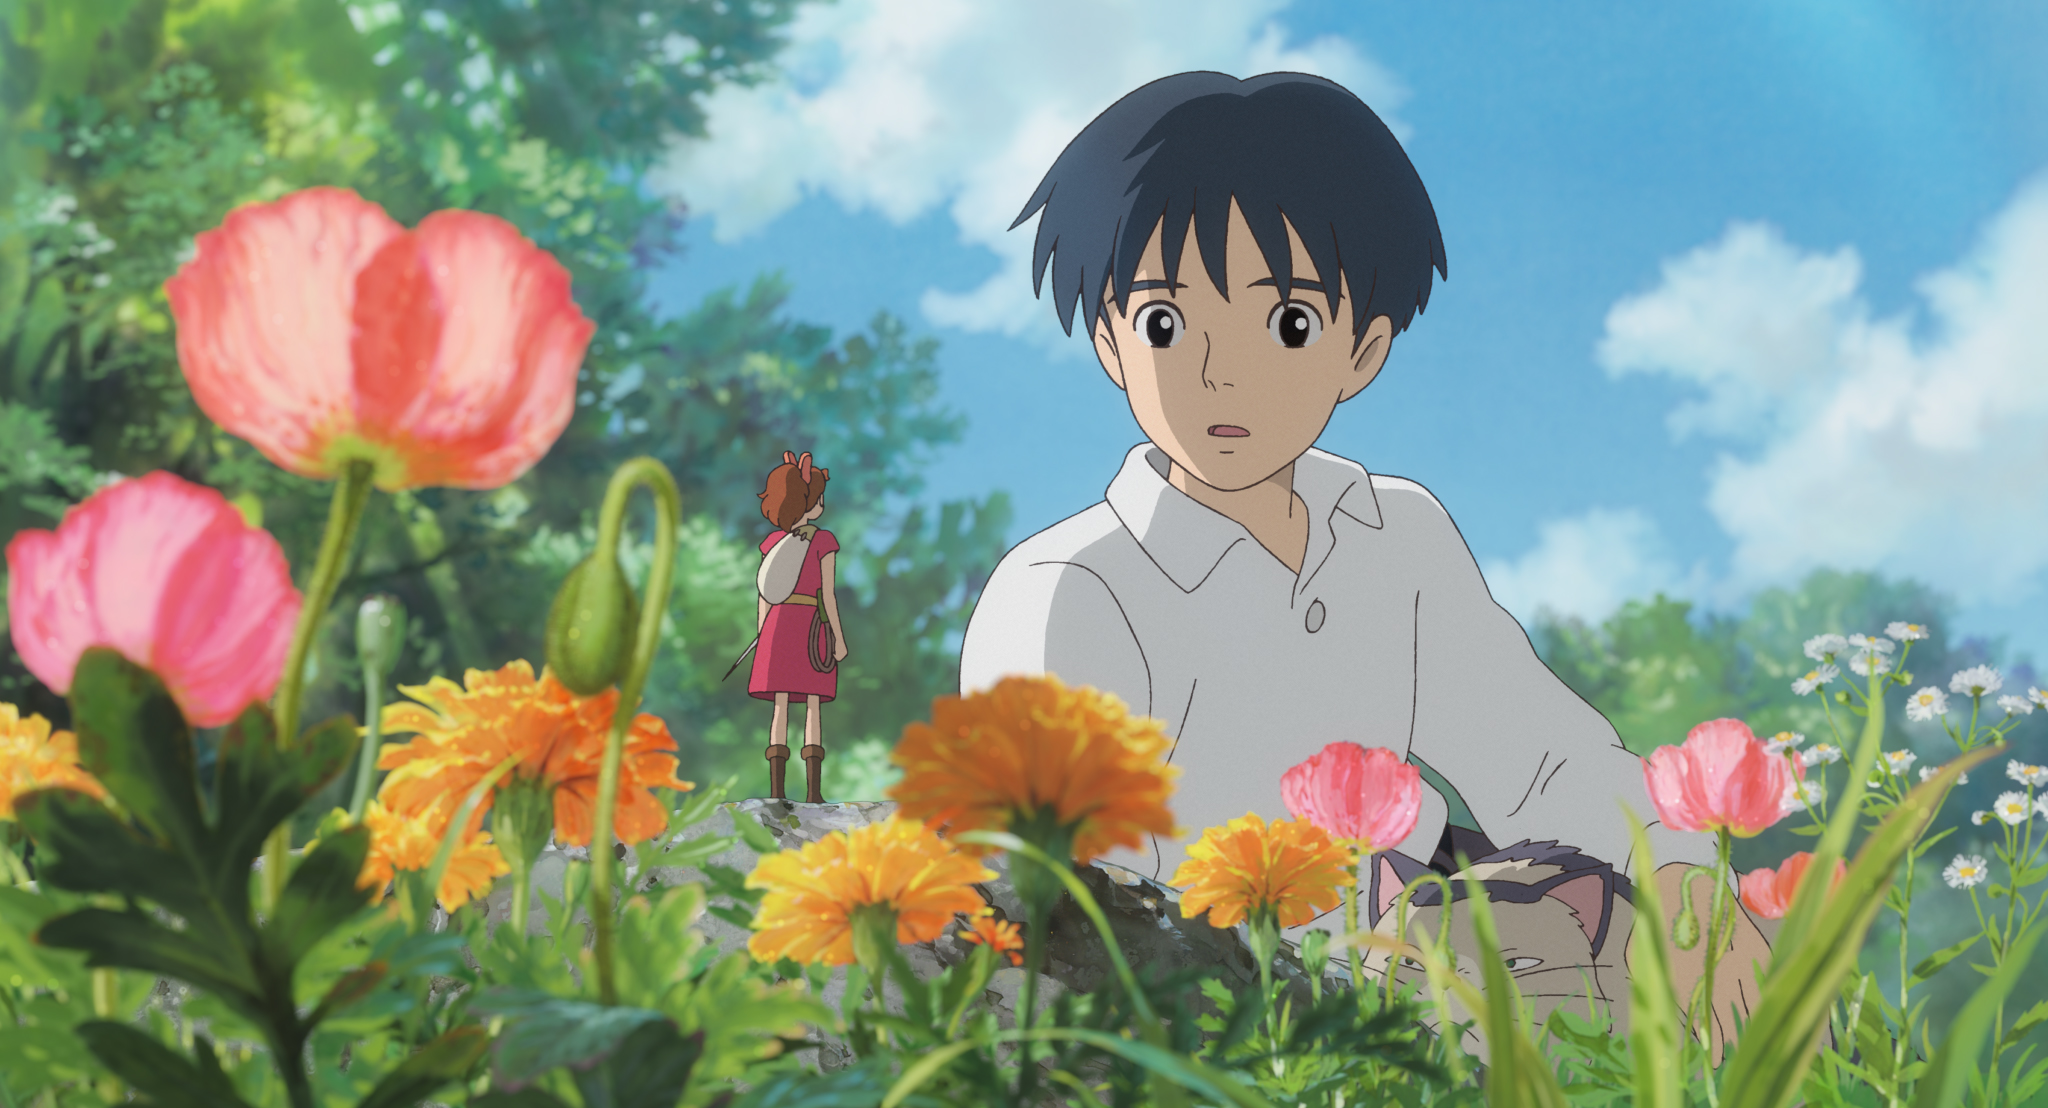 The Best Anime Movies for Beginners and Beyond